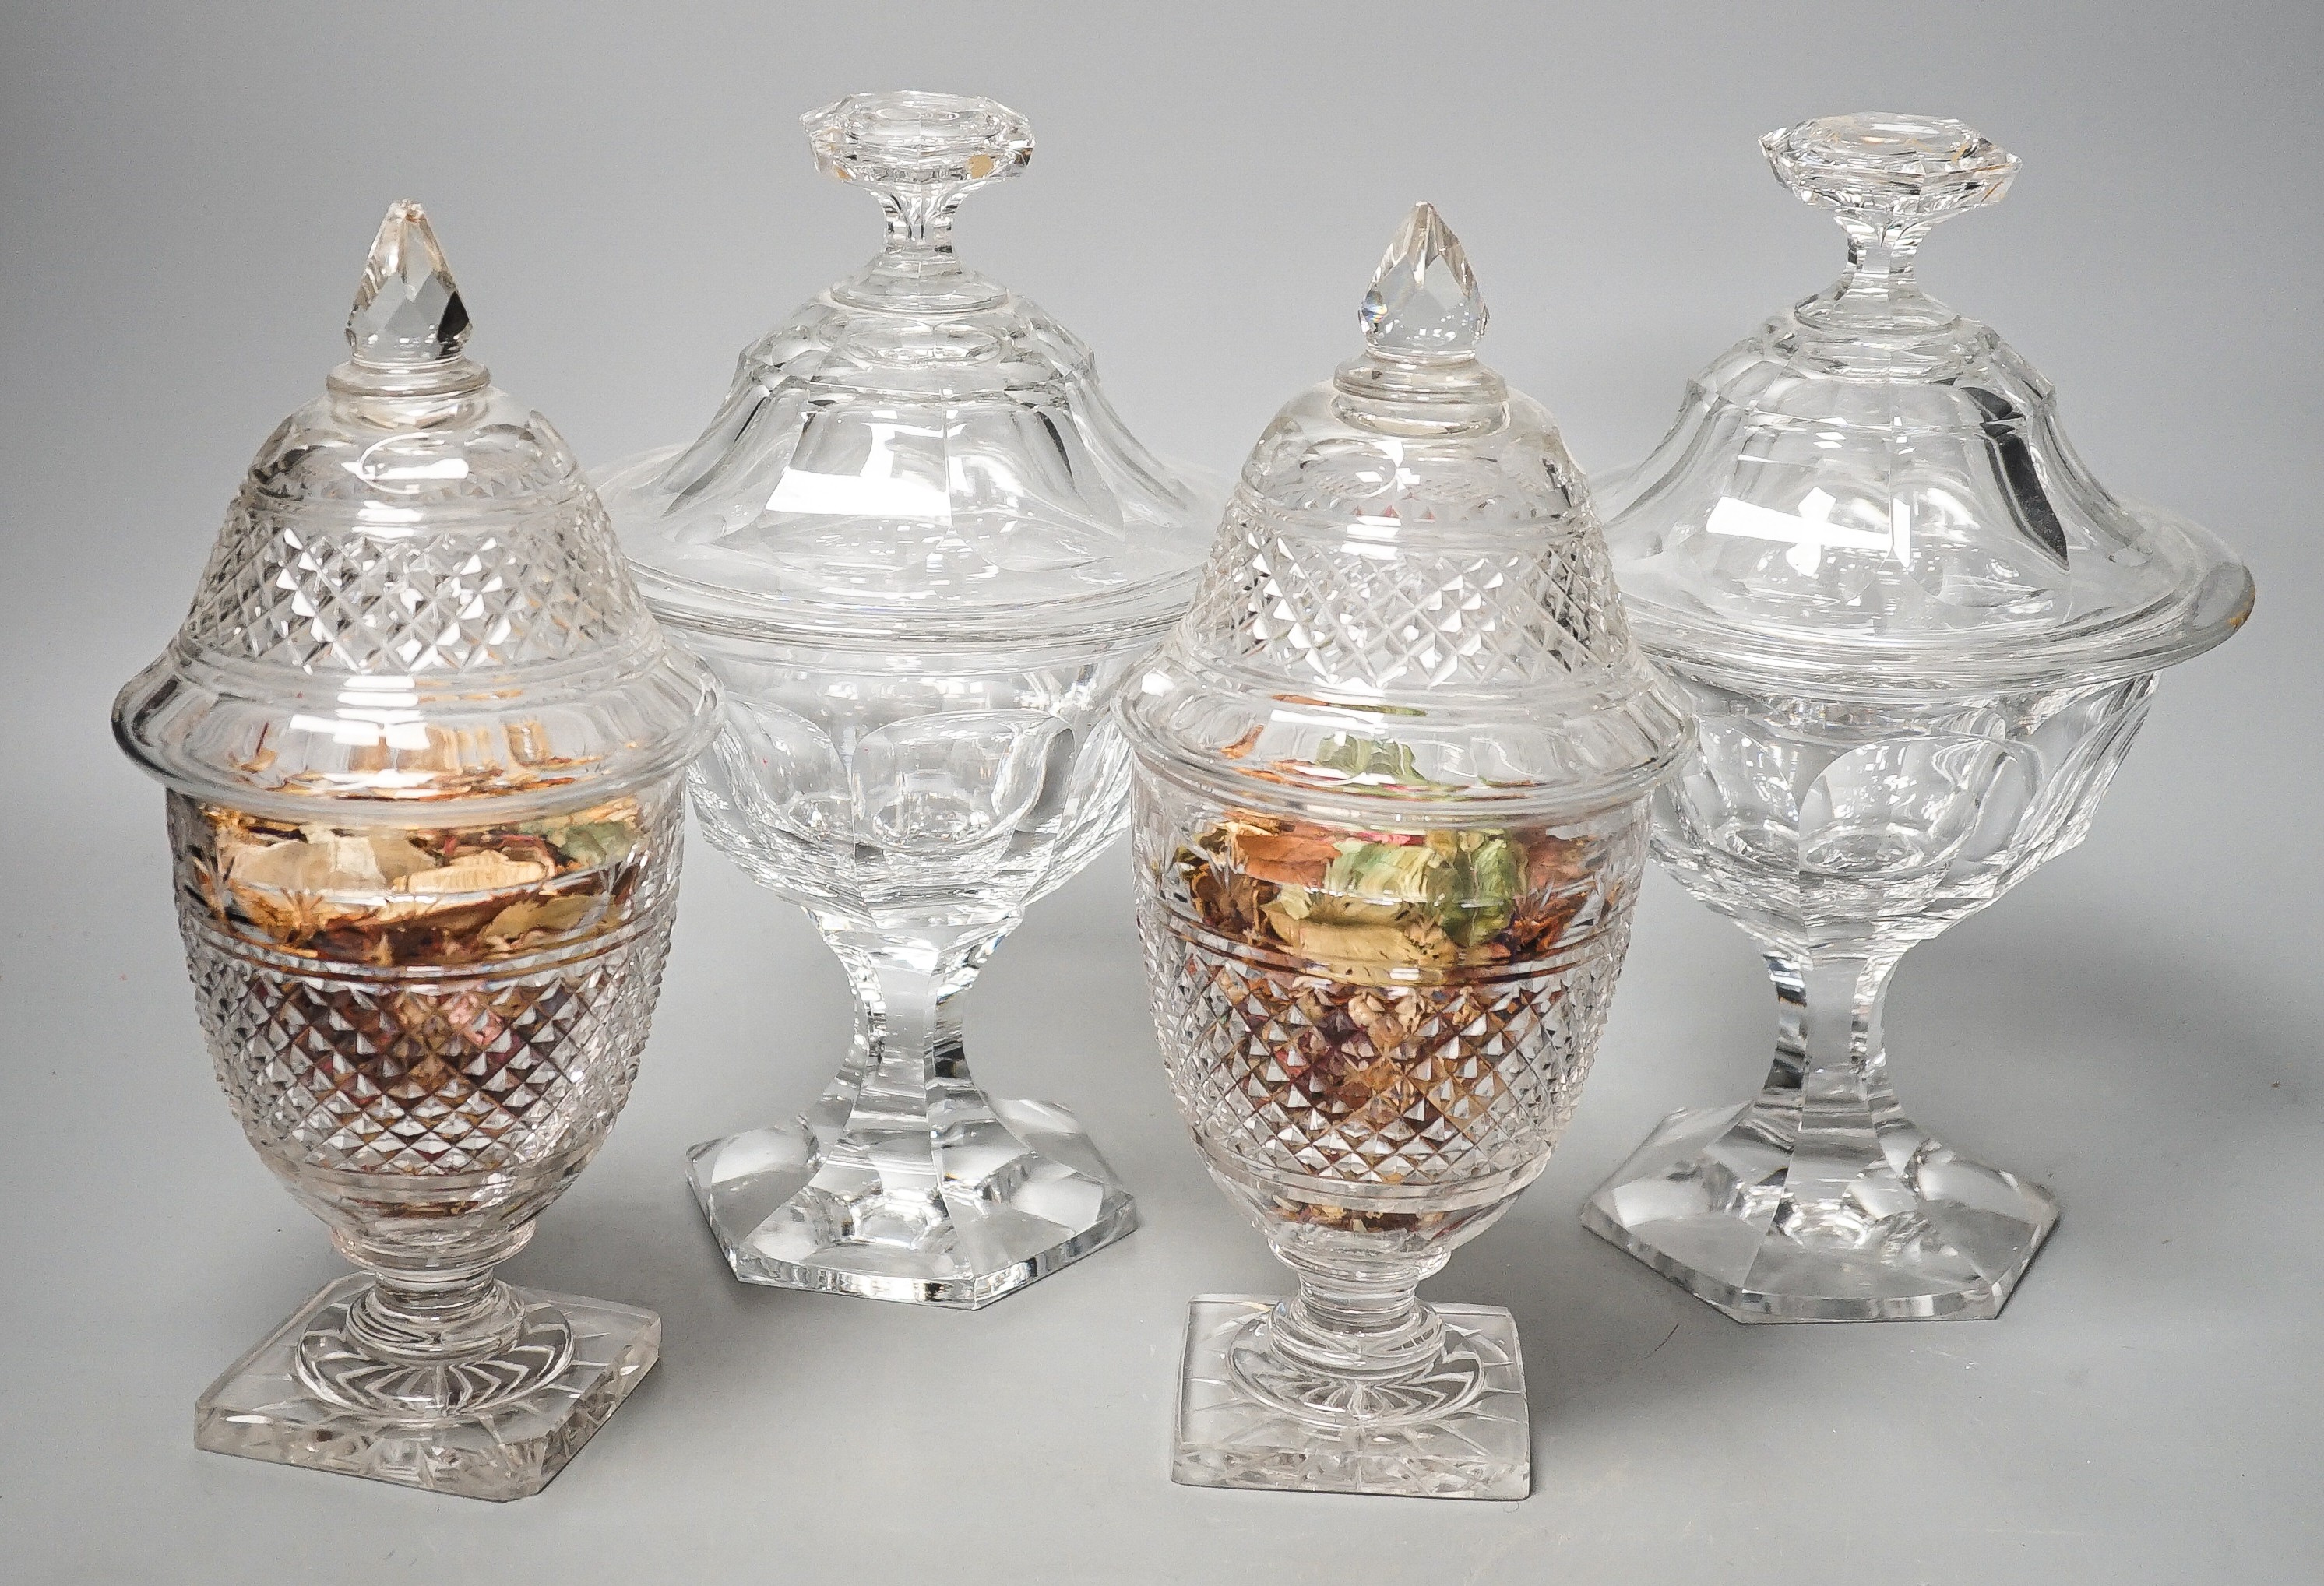 Two pairs of 19th century cut glass glass sweetmeat jars and covers (one a.f.), tallest 25 cms high.